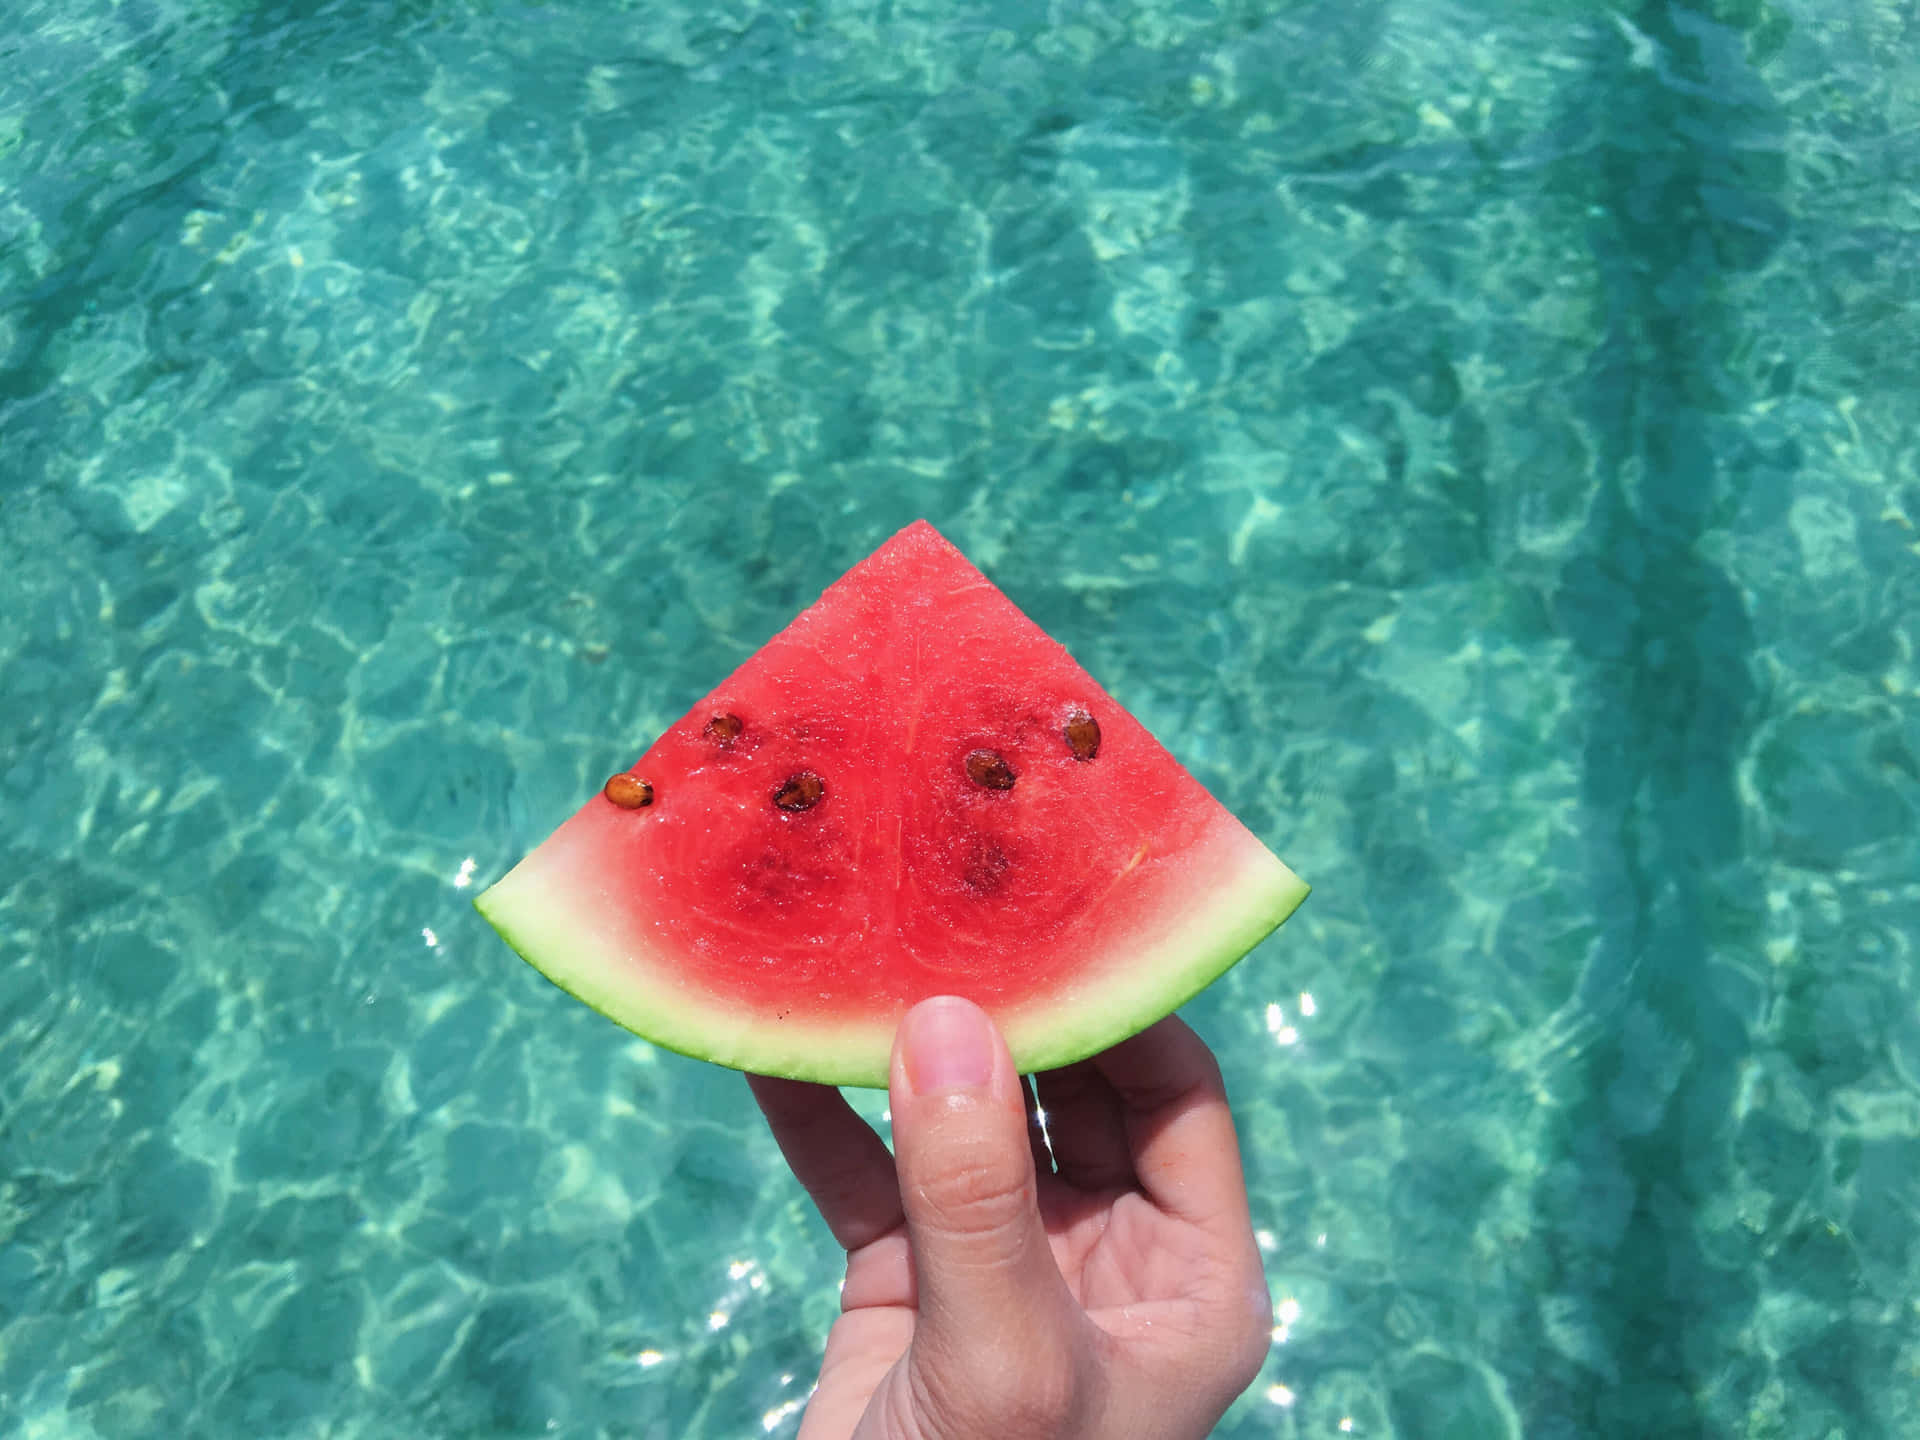 Aesthetic Watermelon Sliced In Swimming Pool Background